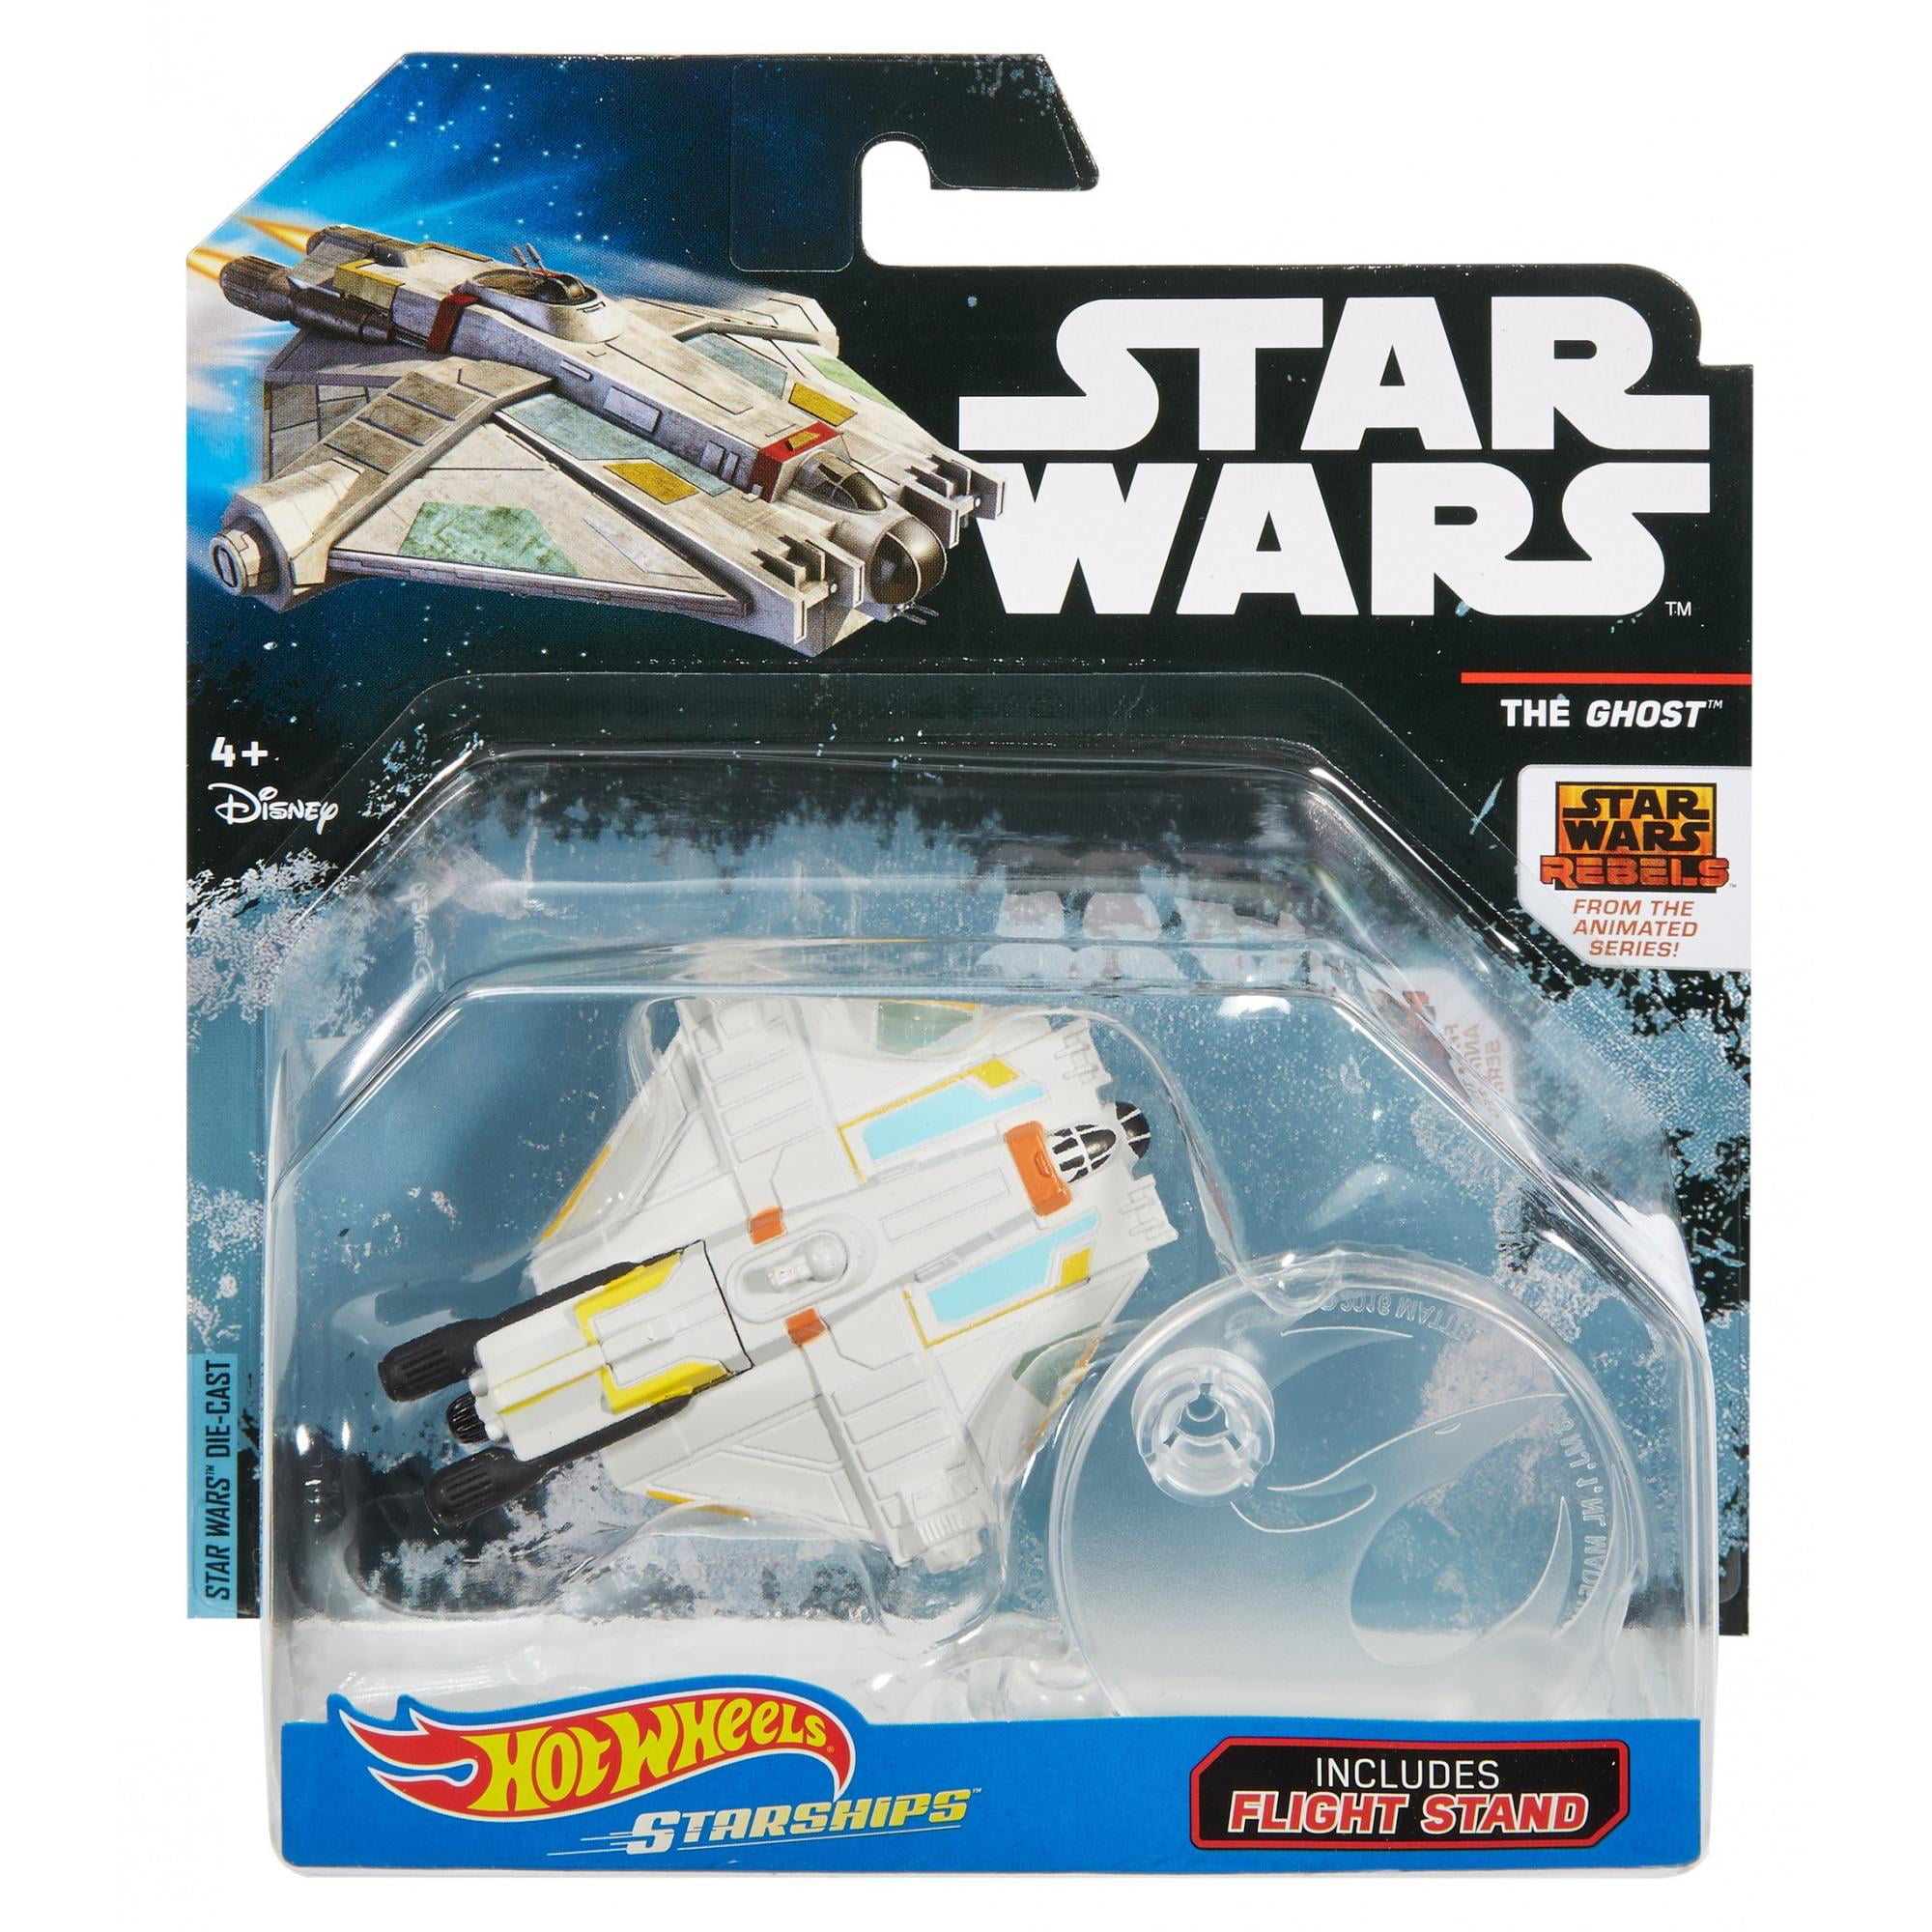 Star Wars Rebels Animated Rogue One Hot Wheels Ghost Starships Toy